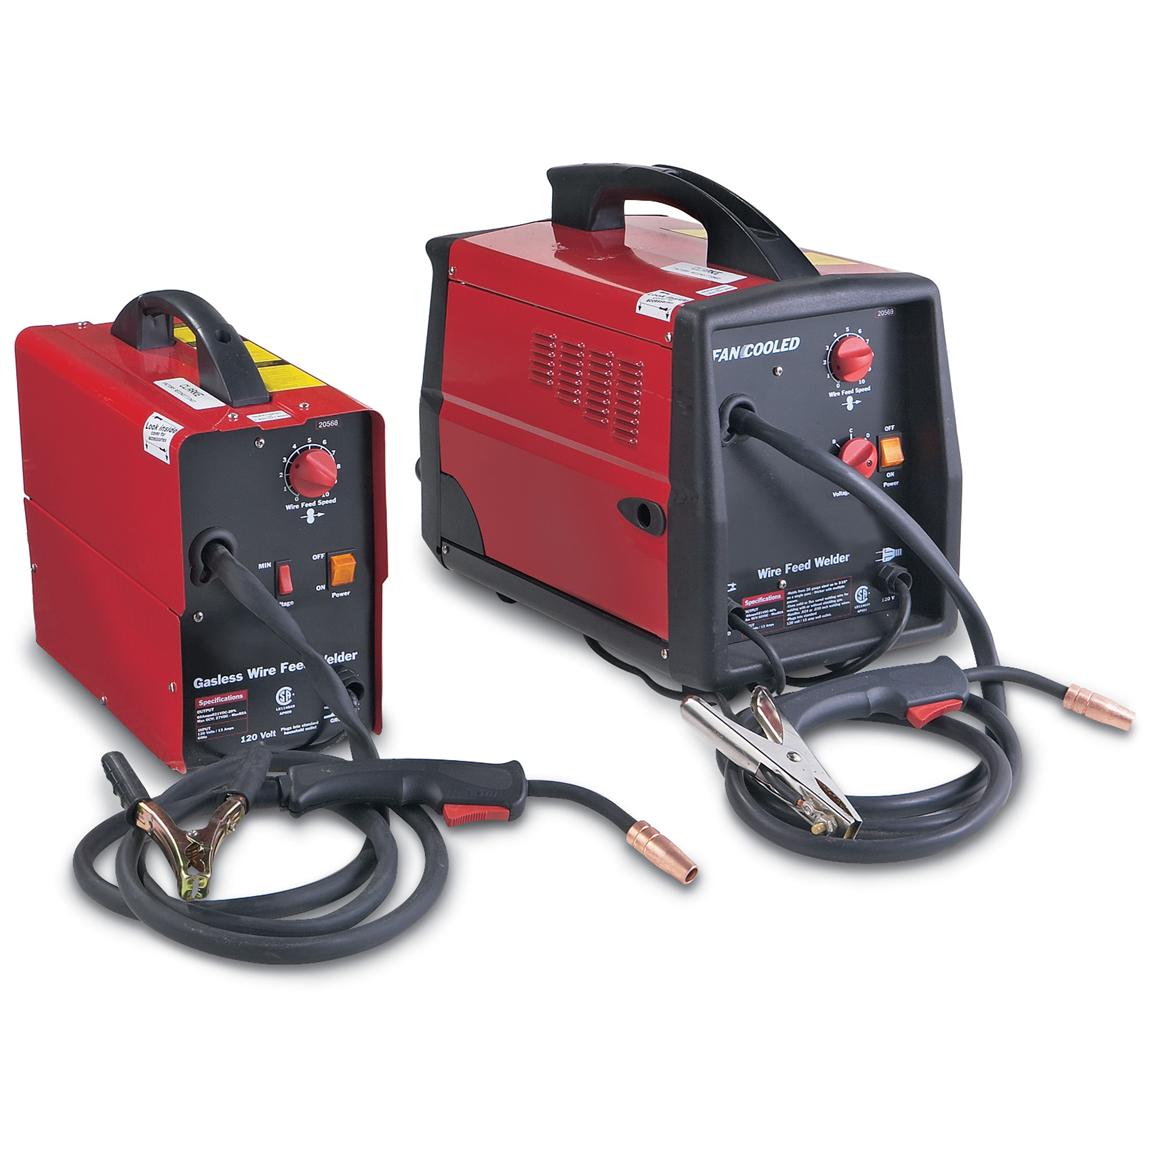 famous-maker-gasless-wire-feed-mig-welder-reconditioned-101999